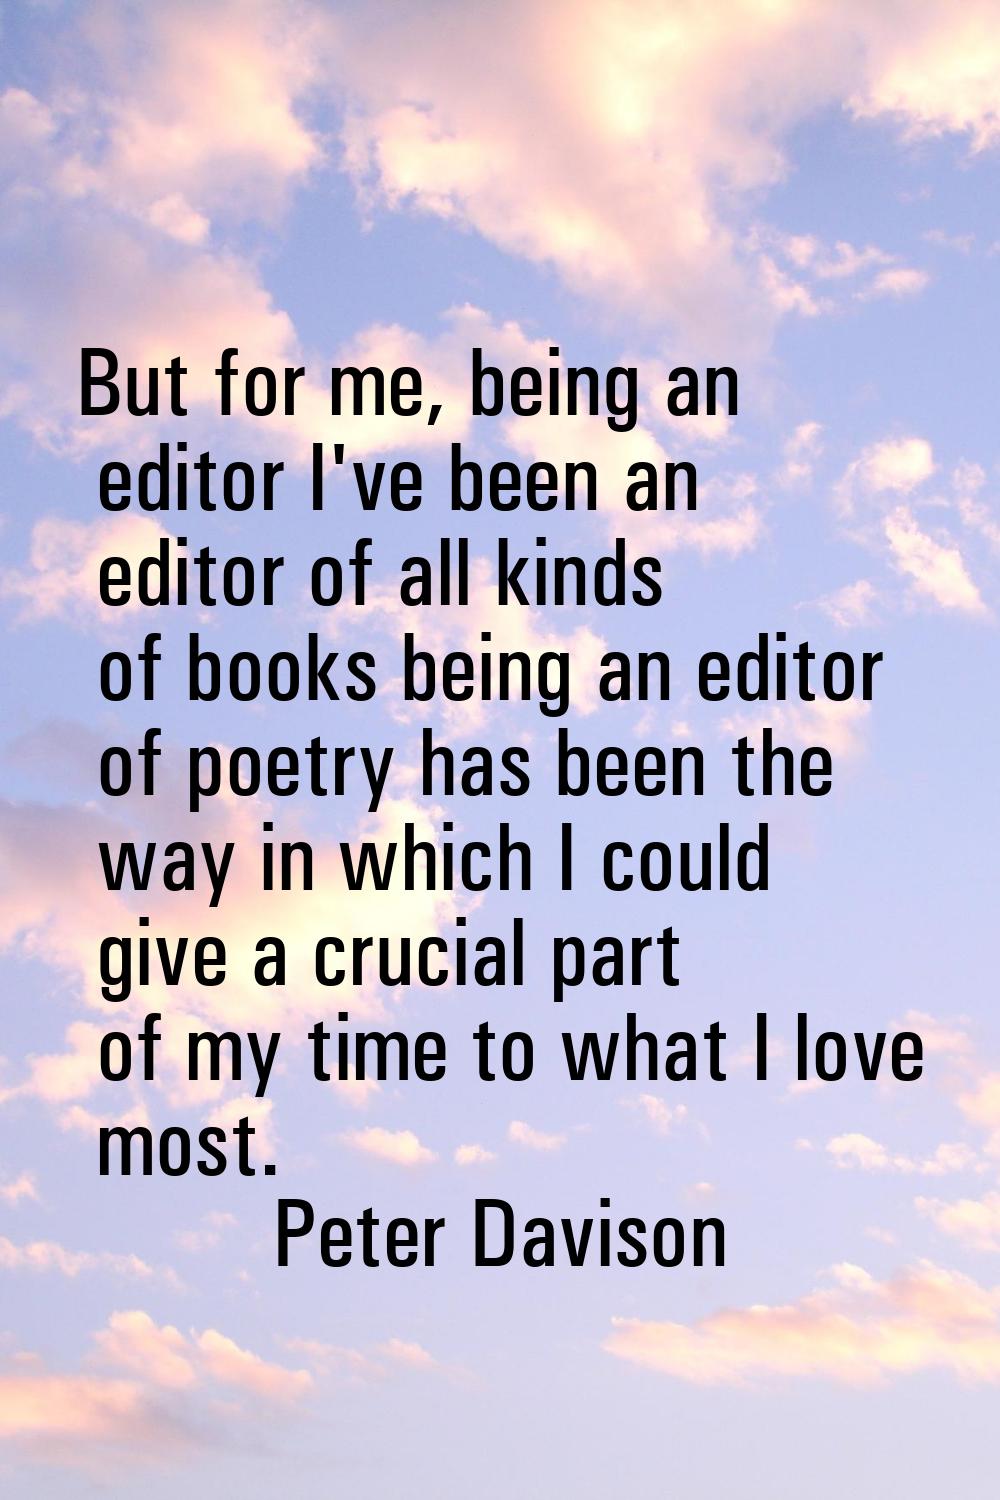 But for me, being an editor I've been an editor of all kinds of books being an editor of poetry has